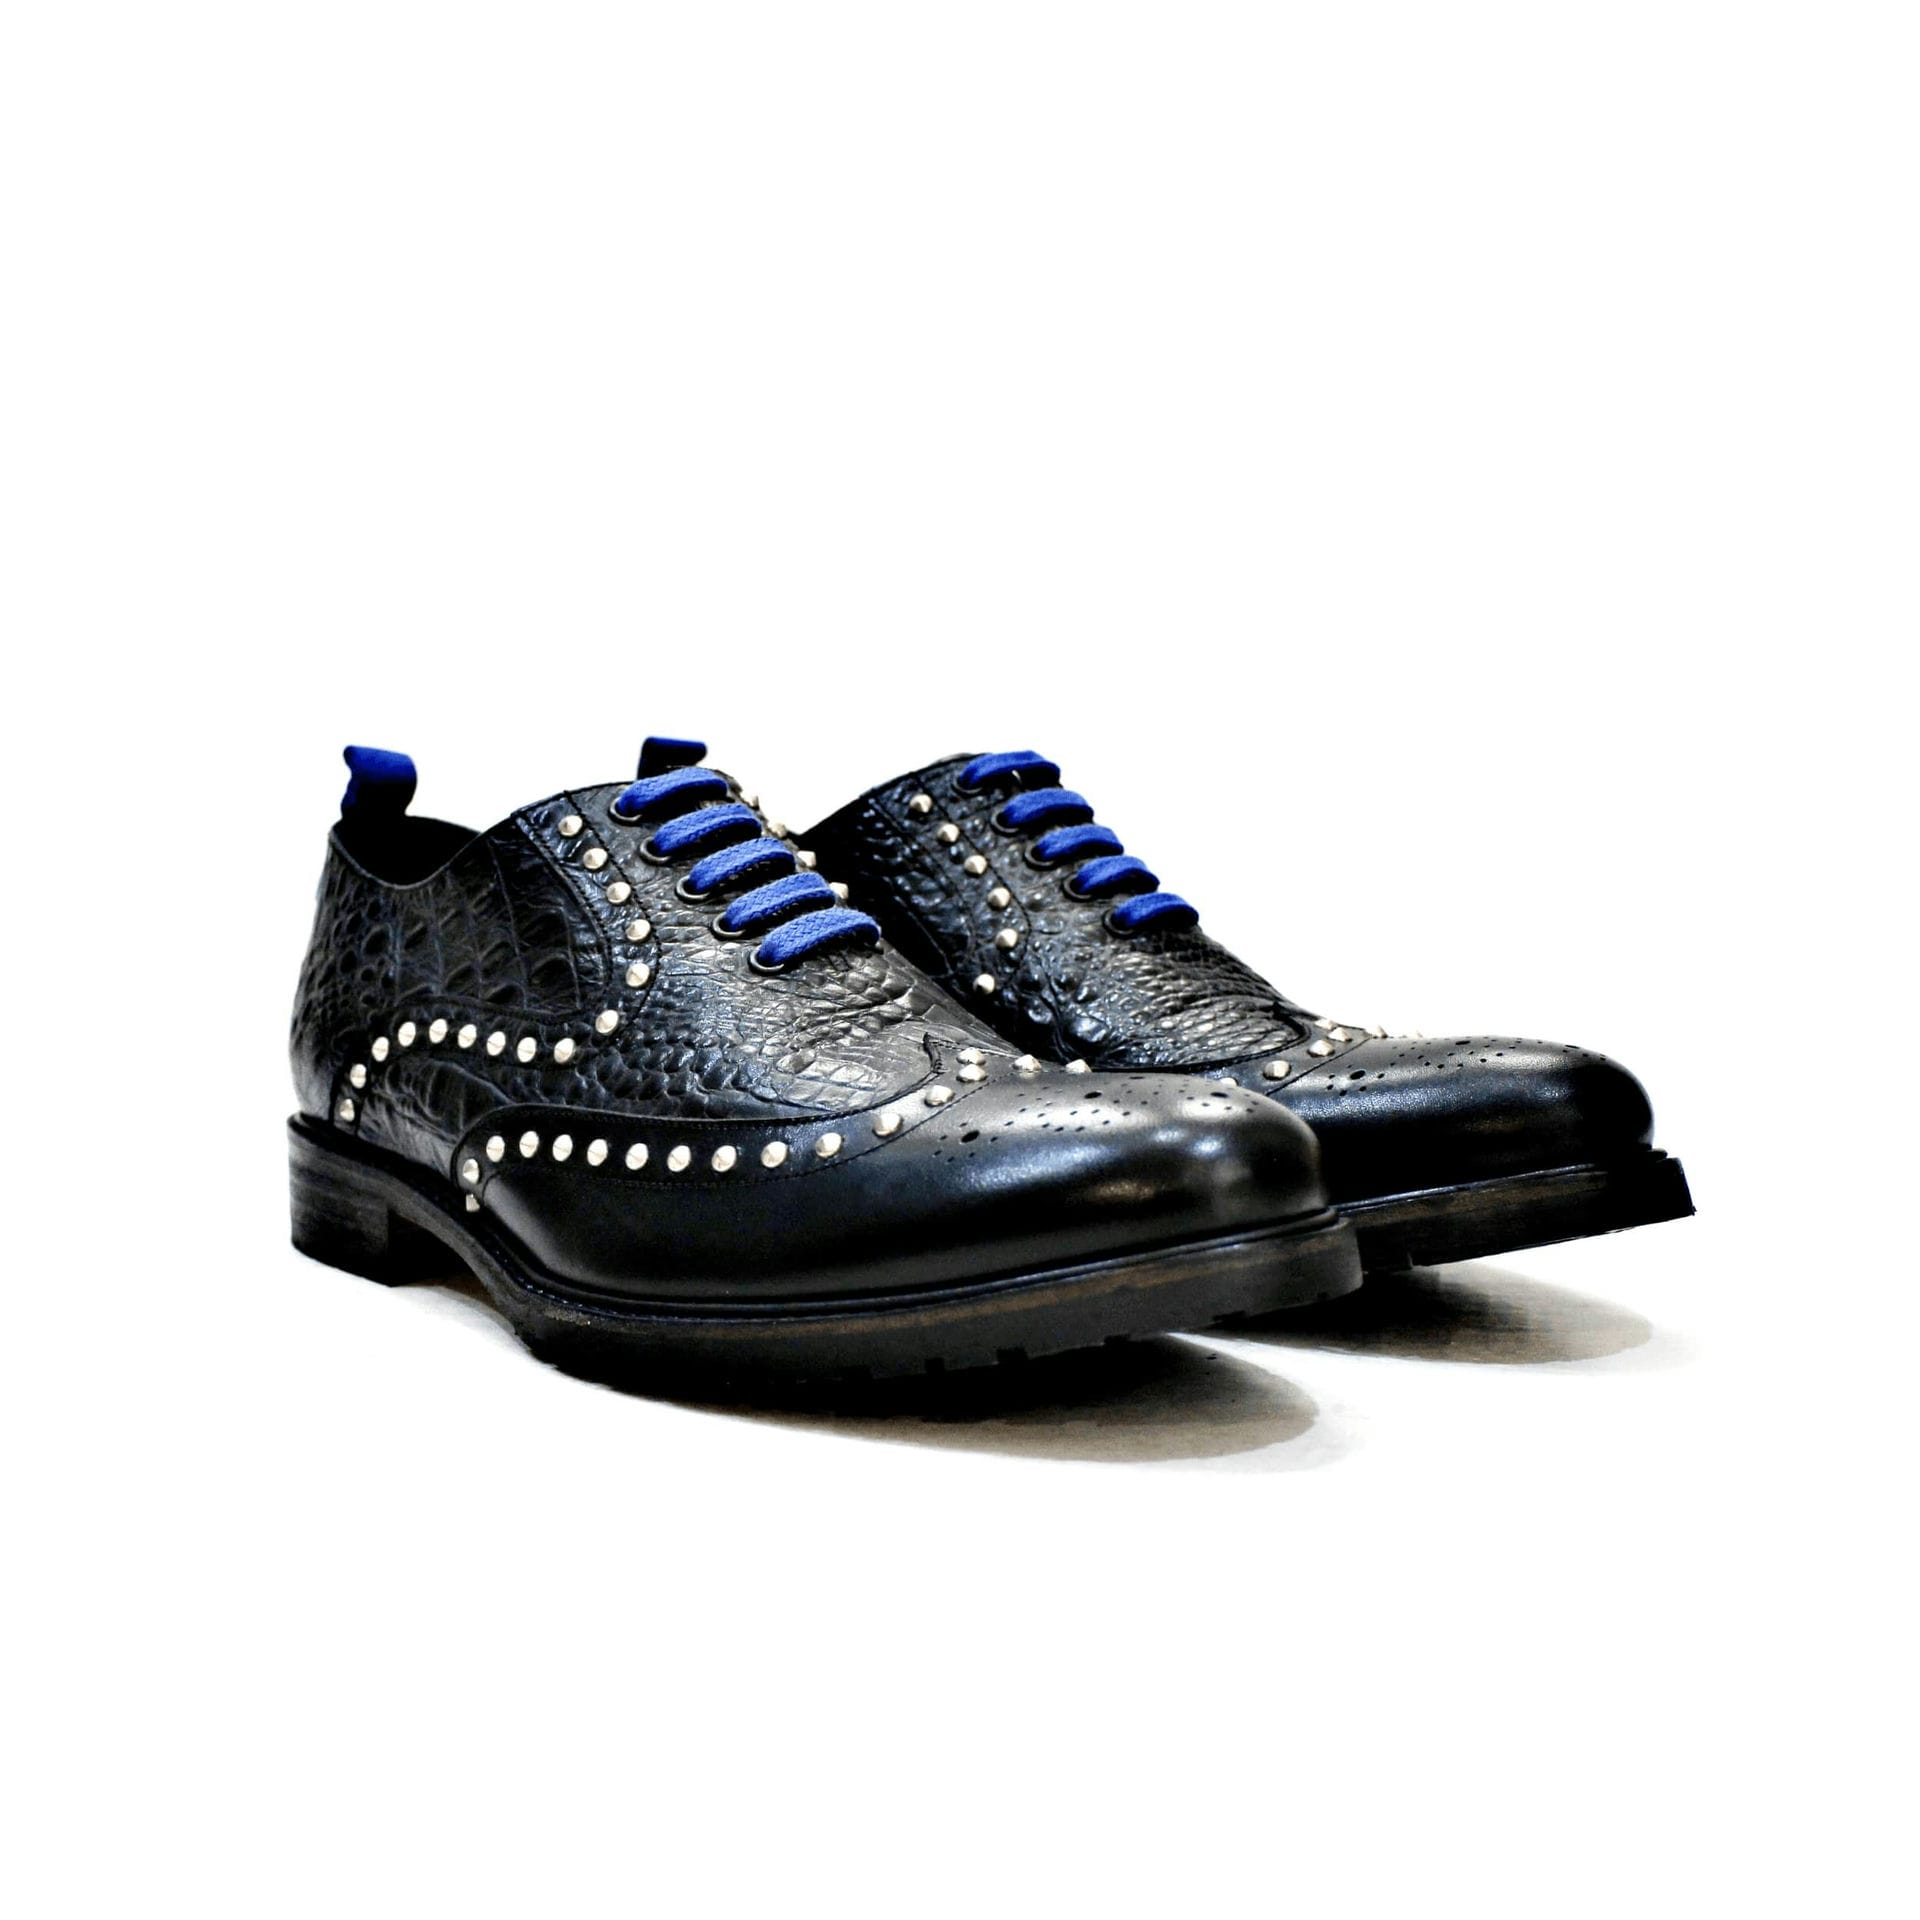 All leather shoe, inwardly and externally, with metal applications, leather soles with rubber trail.